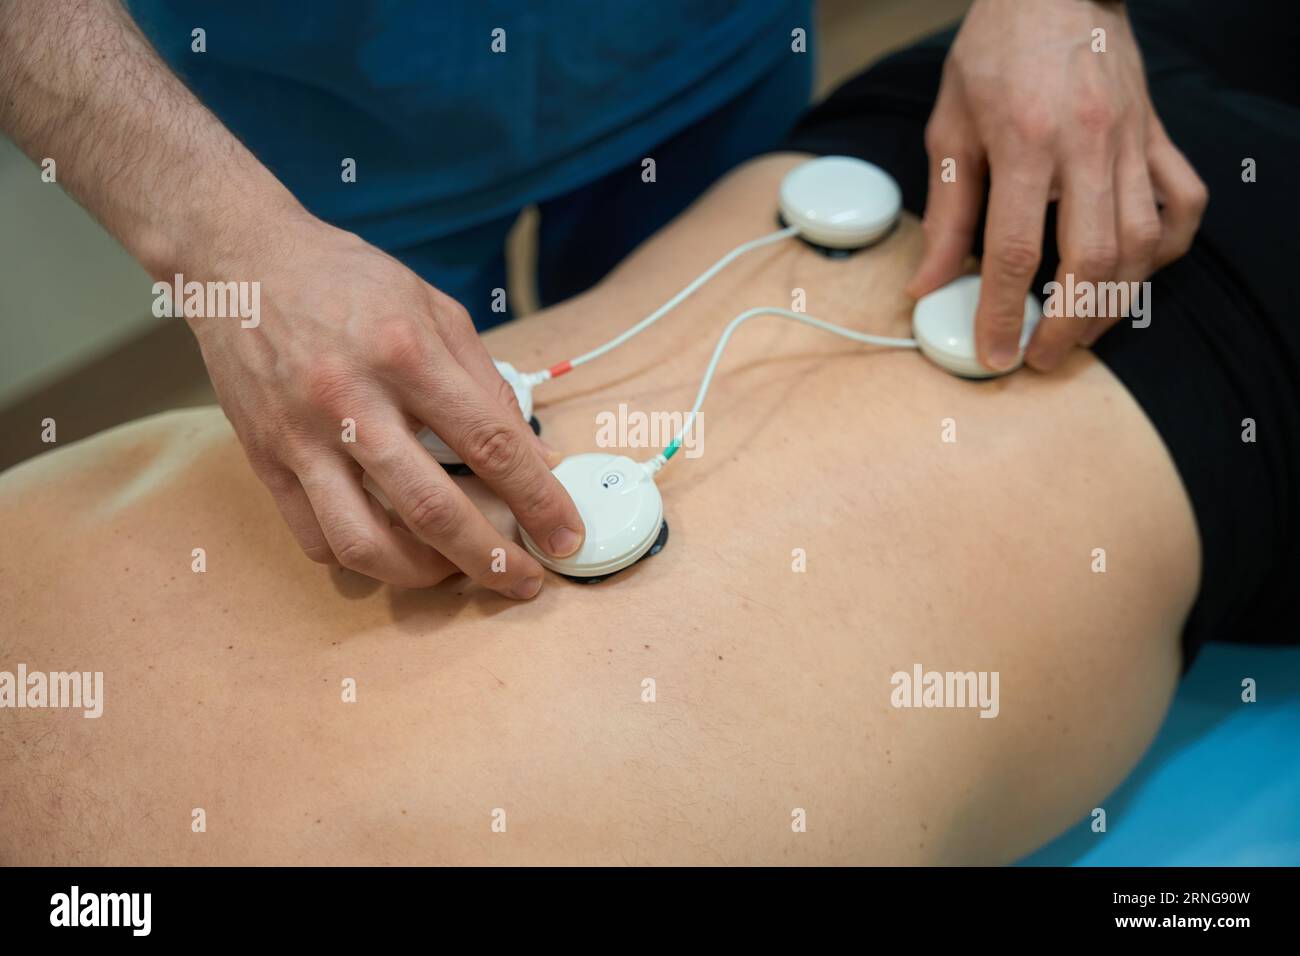 https://c8.alamy.com/comp/2RNG90W/physical-therapist-getting-adult-person-ready-for-electrical-muscle-stimulation-2RNG90W.jpg